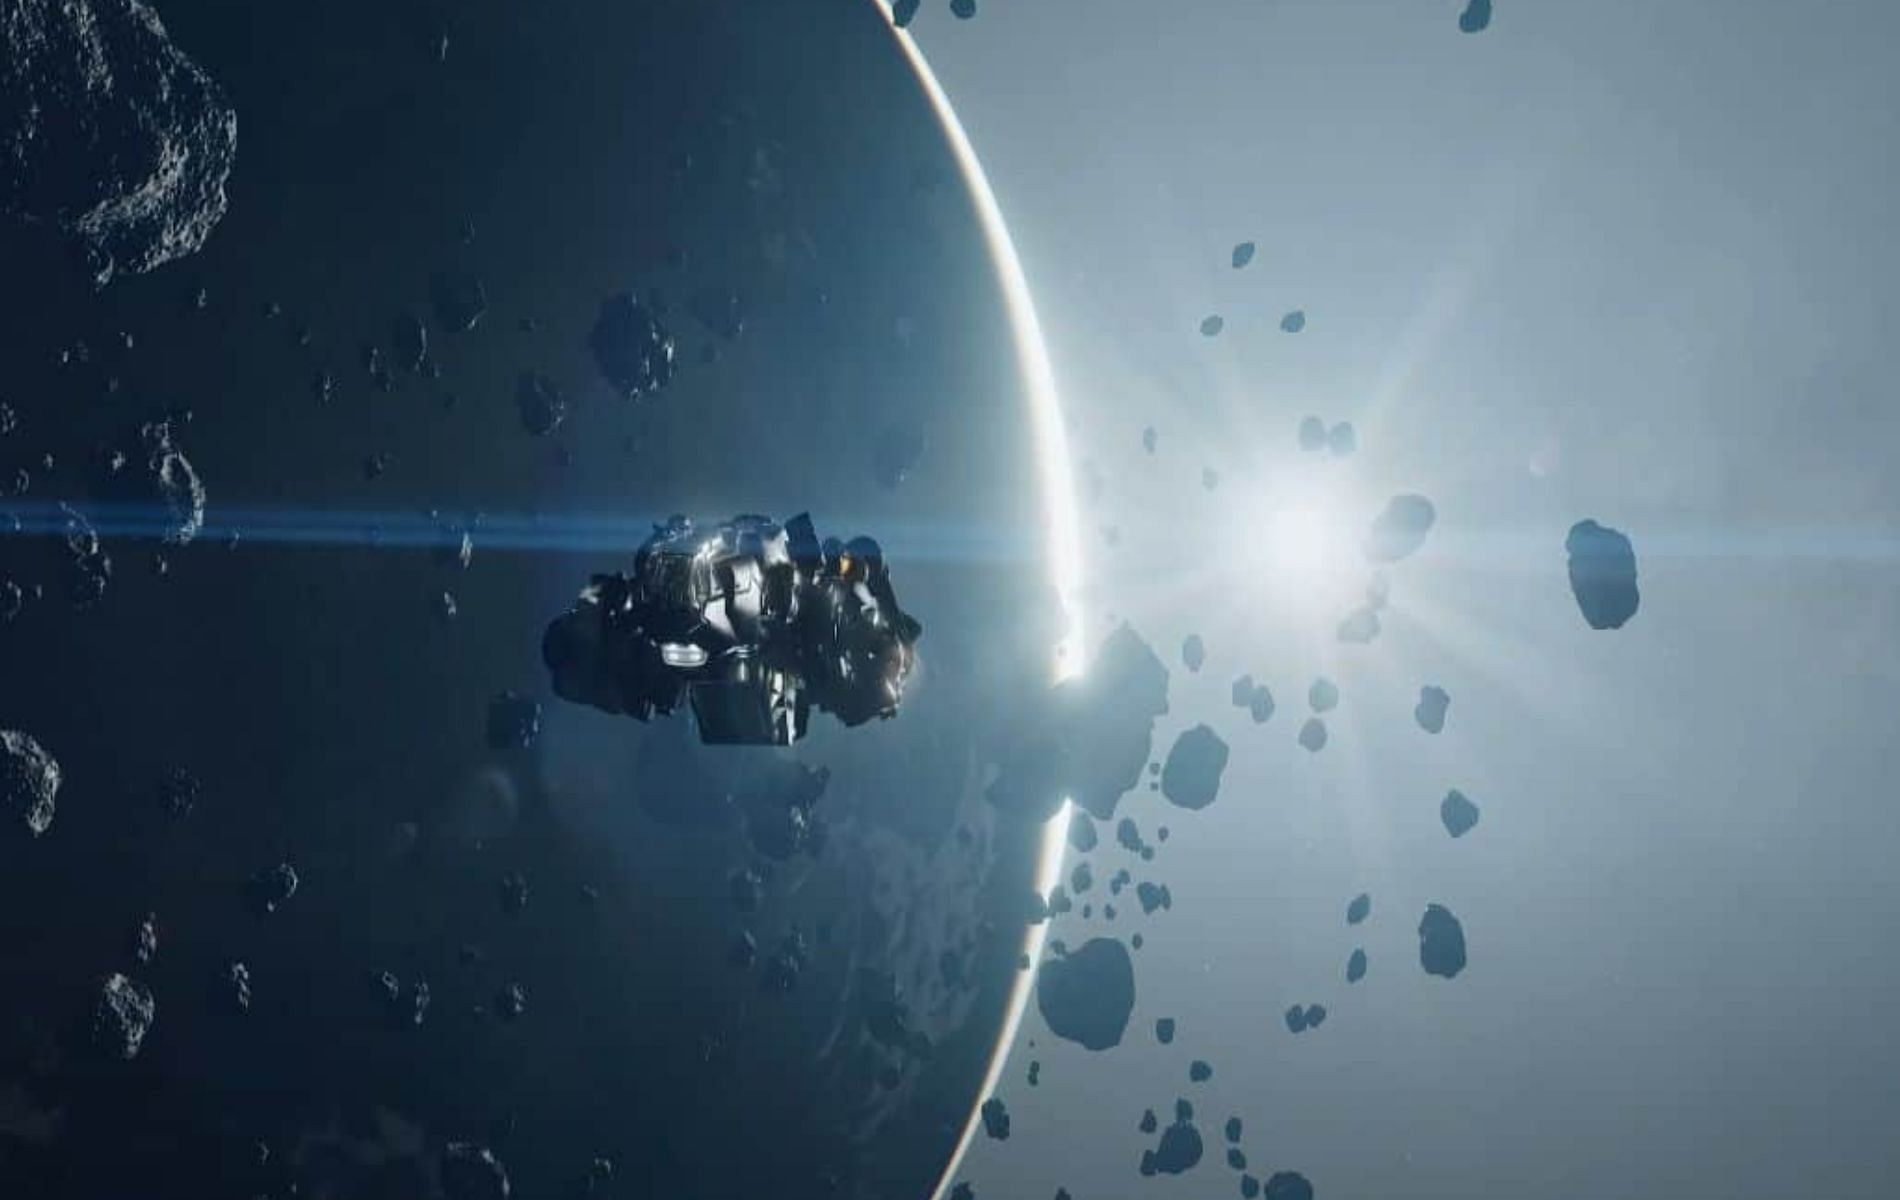 Official promotional screenshot for Starfield by Bethesda Game Studios